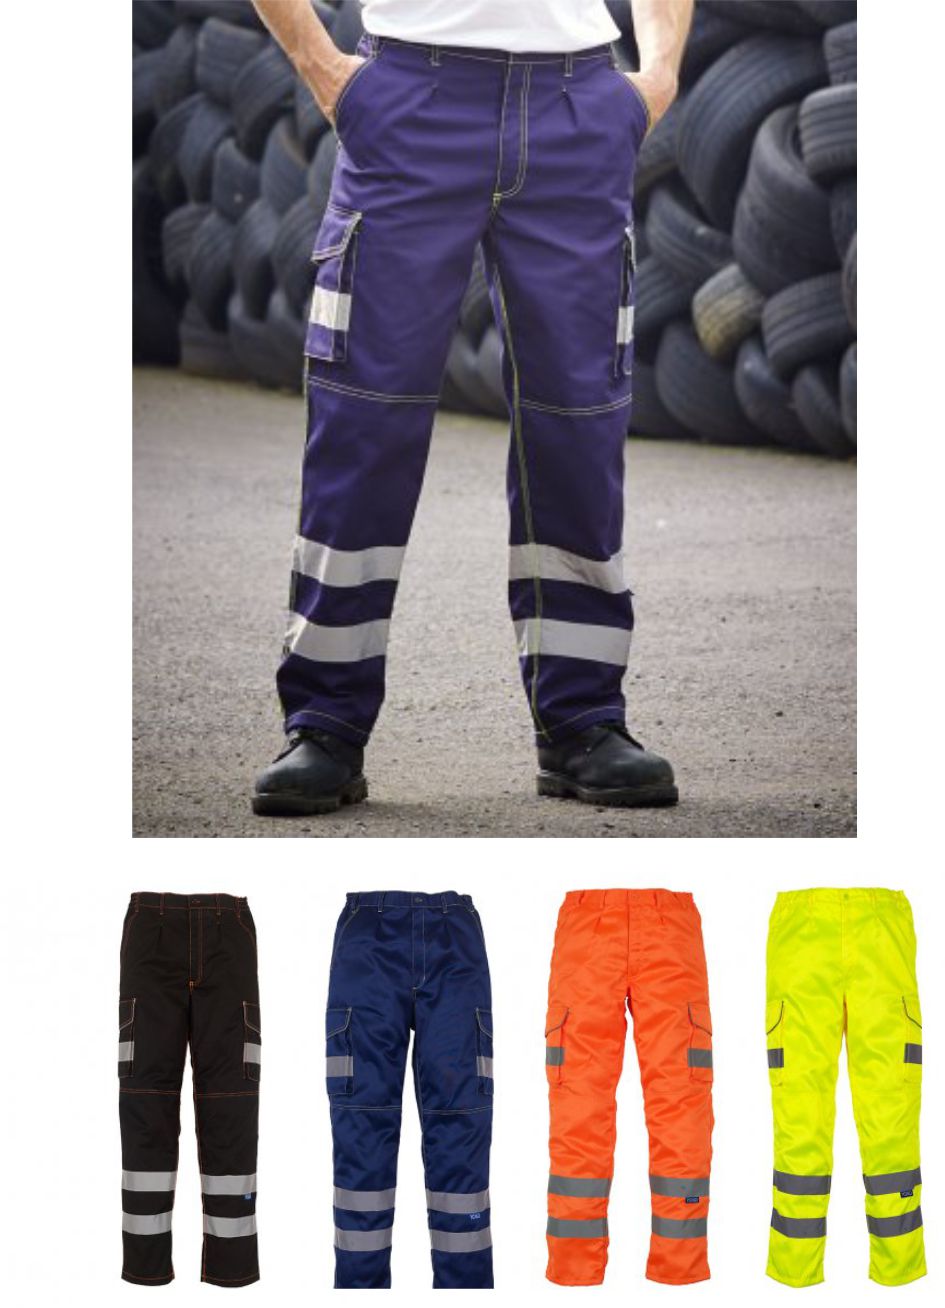 YK301 Hi Vis Cargo Trousers With Knee Pad Pockets